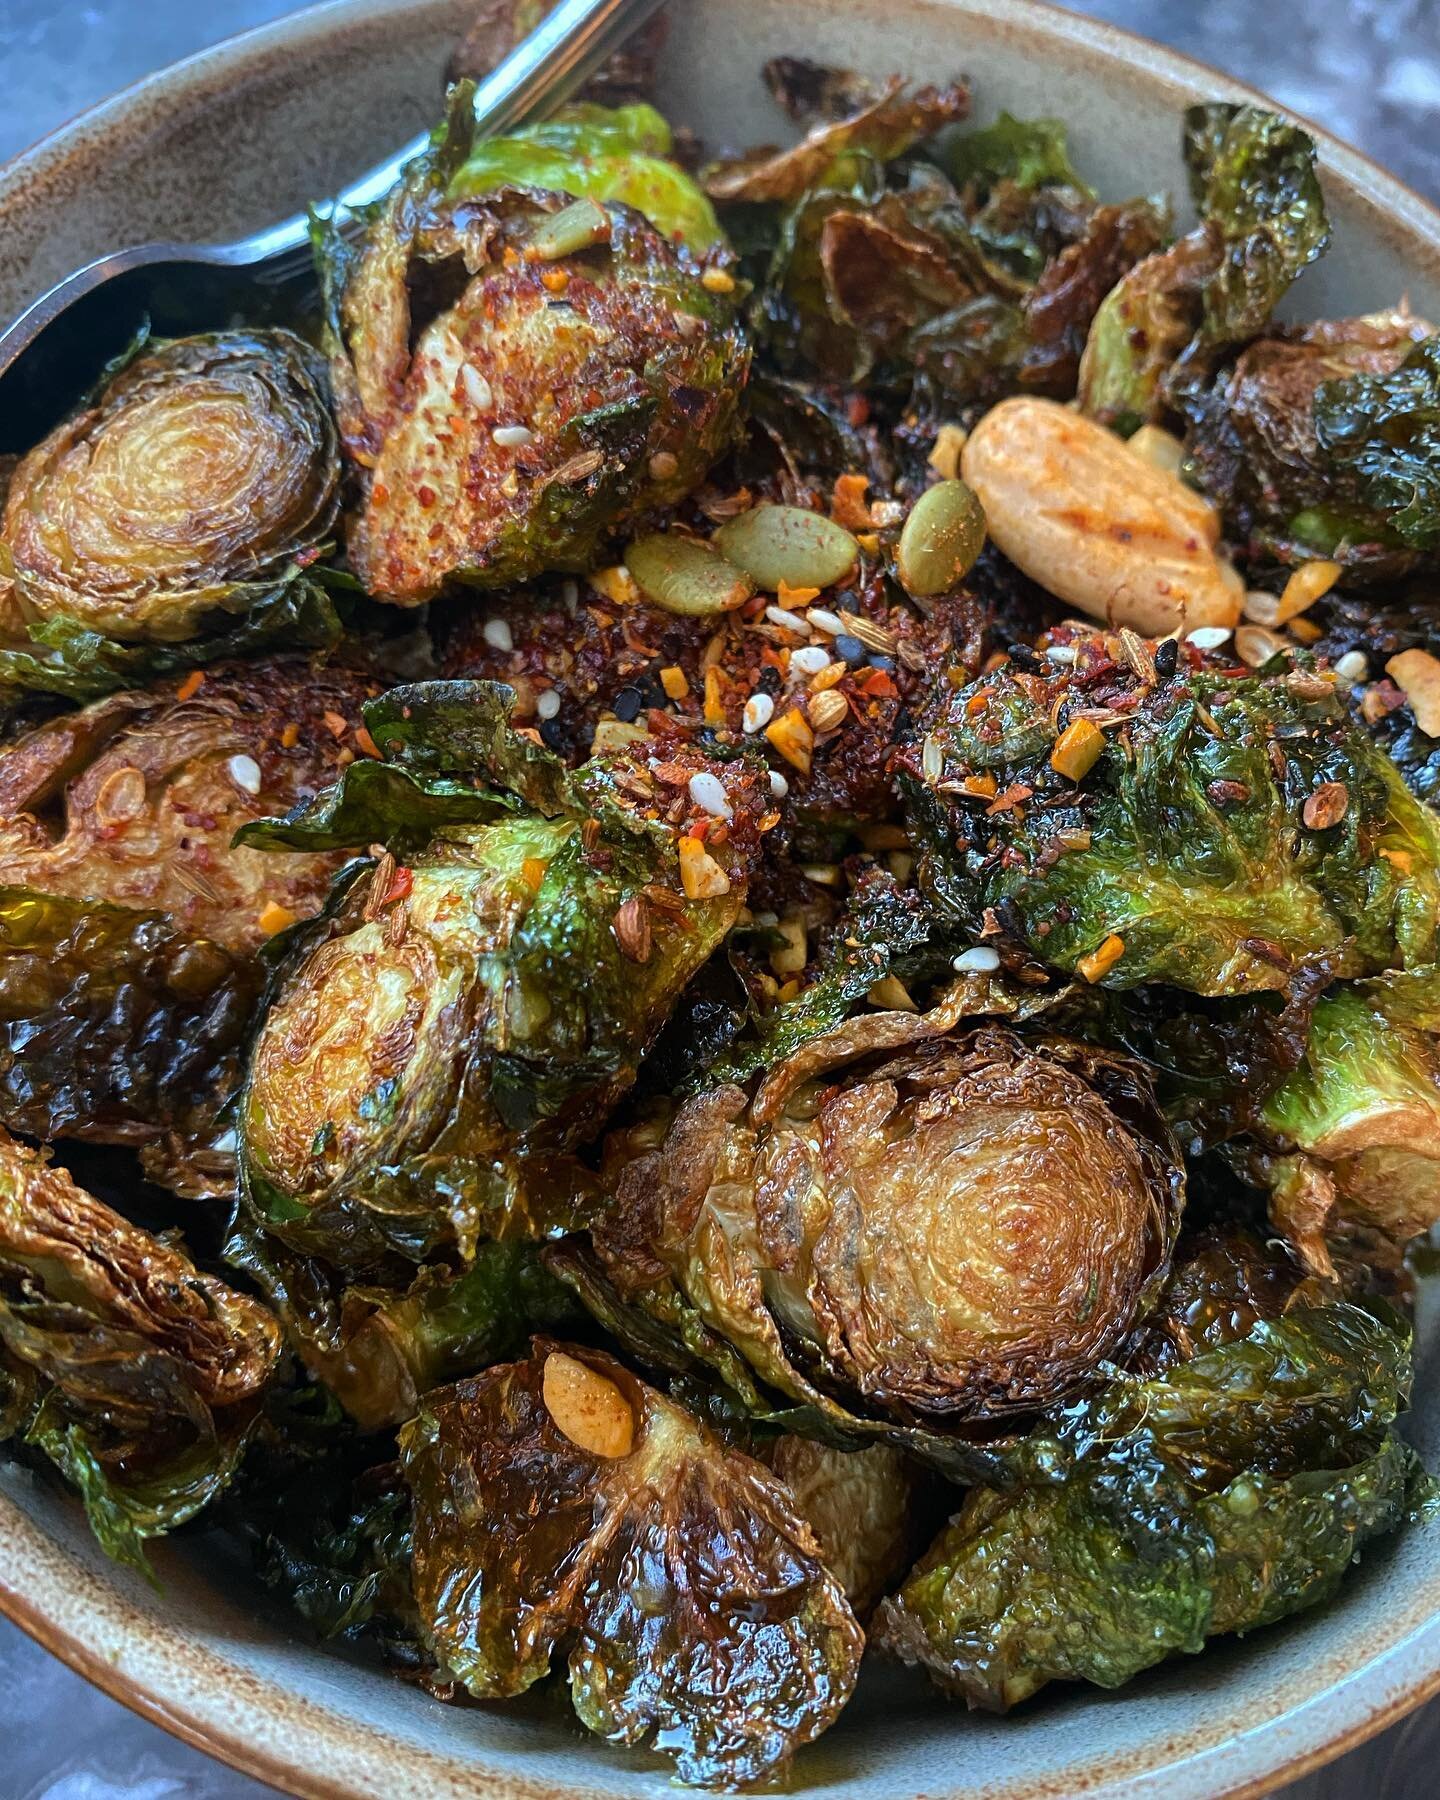 The Brussels sprouts from @abarestaurant - officially made it to my list of top 5 brussels of all time. (BIG statement coming from me)🤭

If you ever find yourself in Austin, Texas be sure to add these to your list.

Fried Brussels coated in honey to